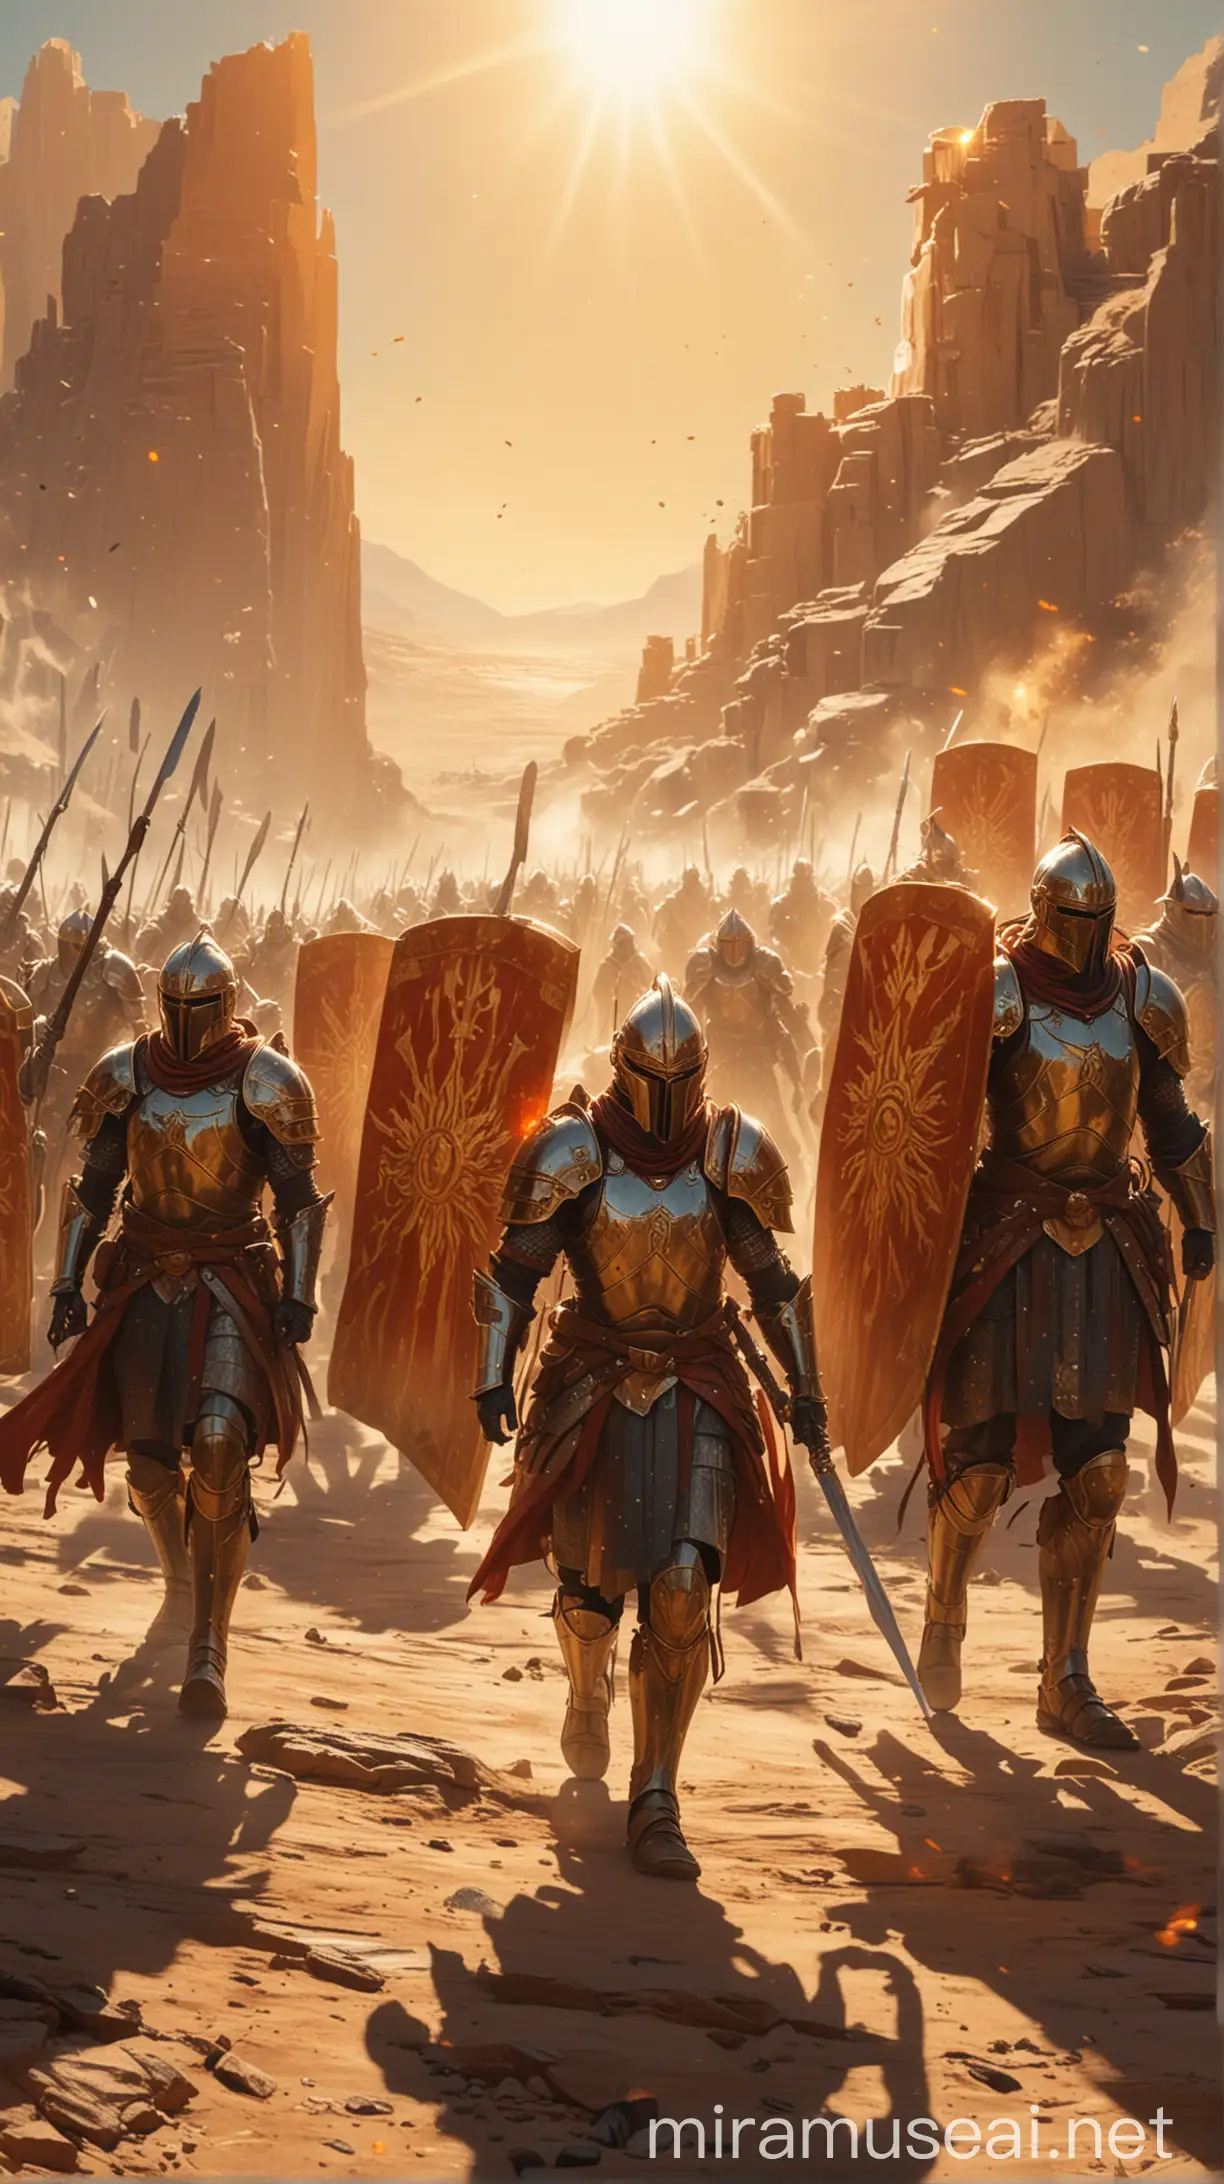  "A group of elite soldiers in gleaming armor march in unison under a blazing sun, carrying large rectangular shields and short swords." hyper realistic